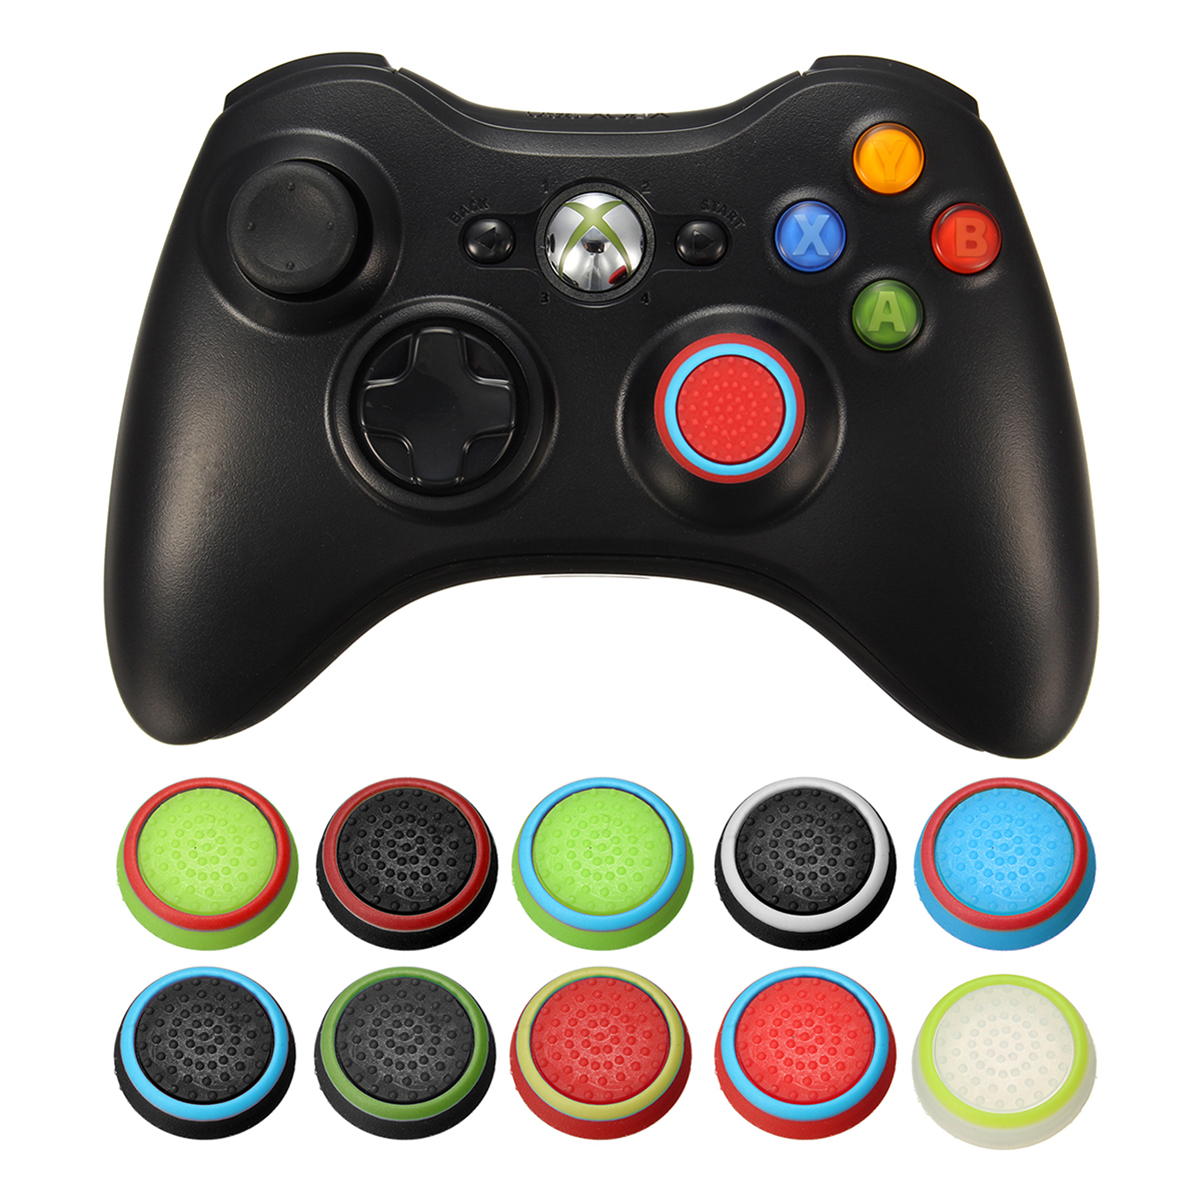 

Rubber Silicone Thumbstick Joystick Cap Thumb Stick Cover Grips For PS4 For PS3 For XBOXONE For XBOX360 Wireless Controller